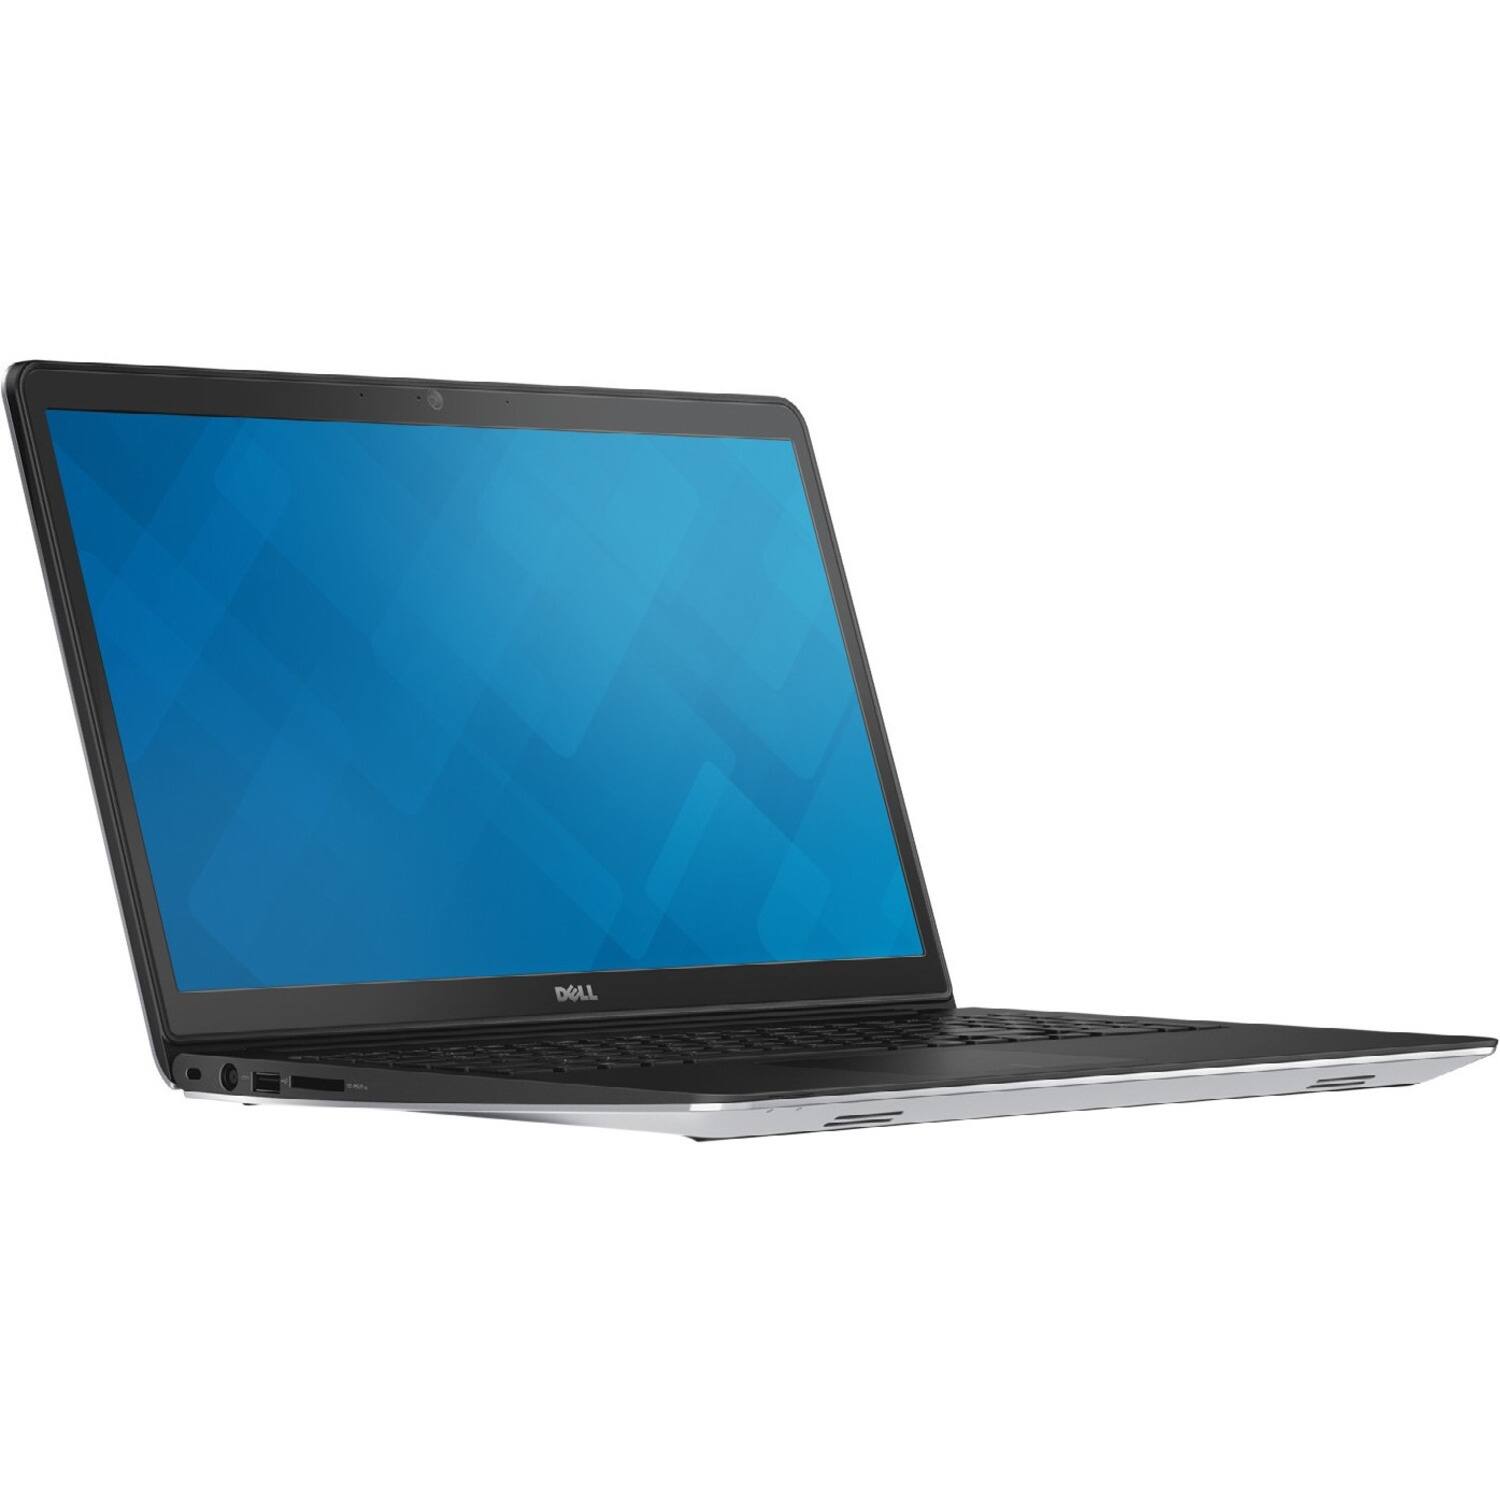 Dell Inspiron 15 5000 15-5555 15.6" Touchscreen LCD Notebook - AMD A-